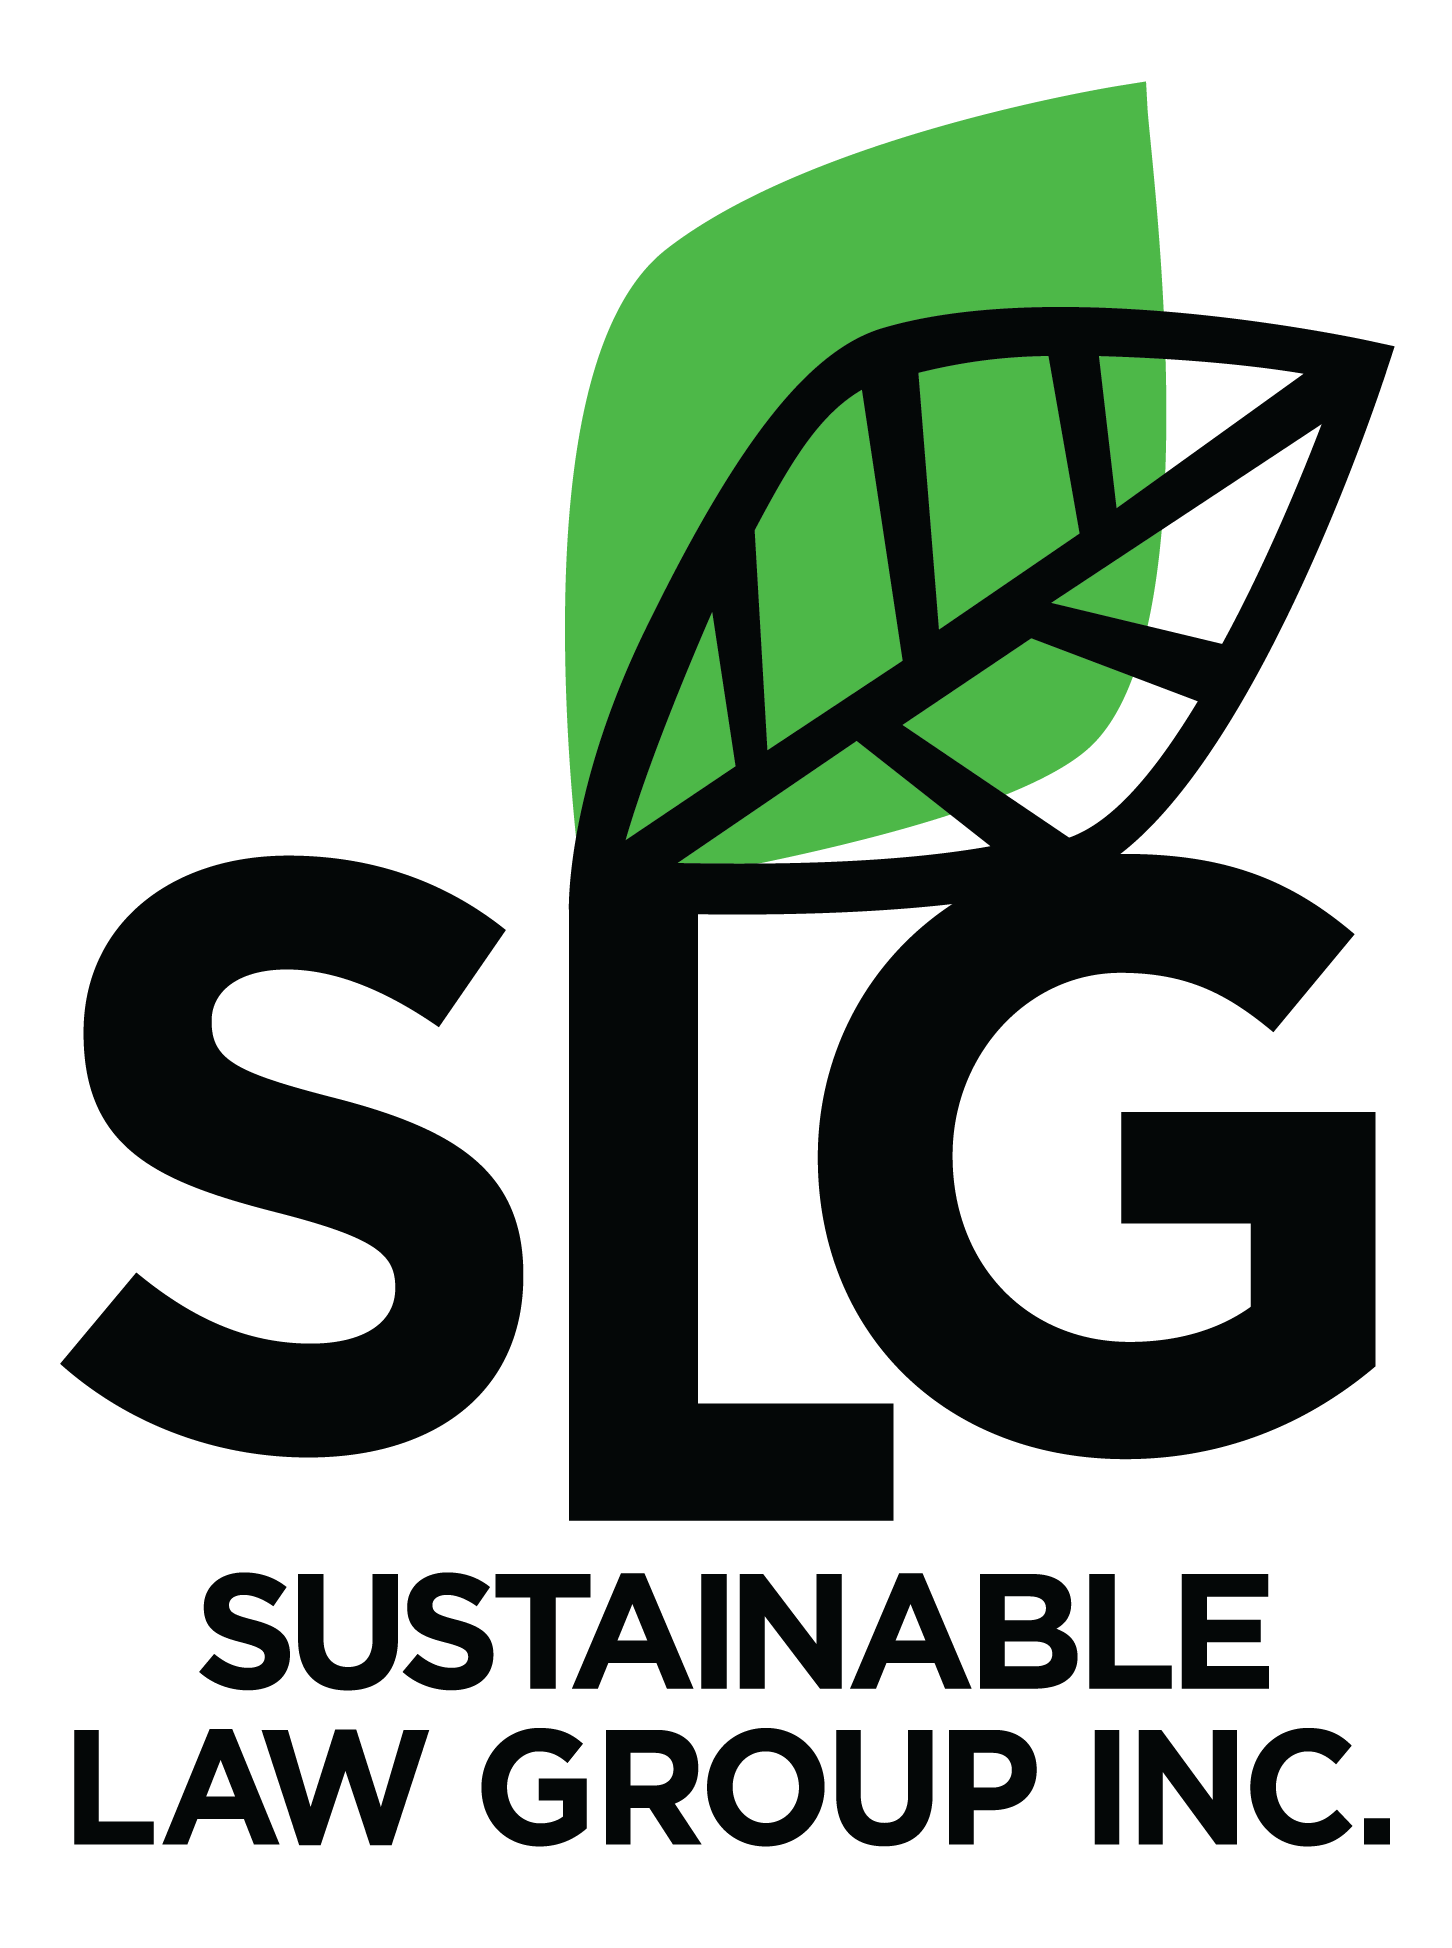 Sustainable Law Group